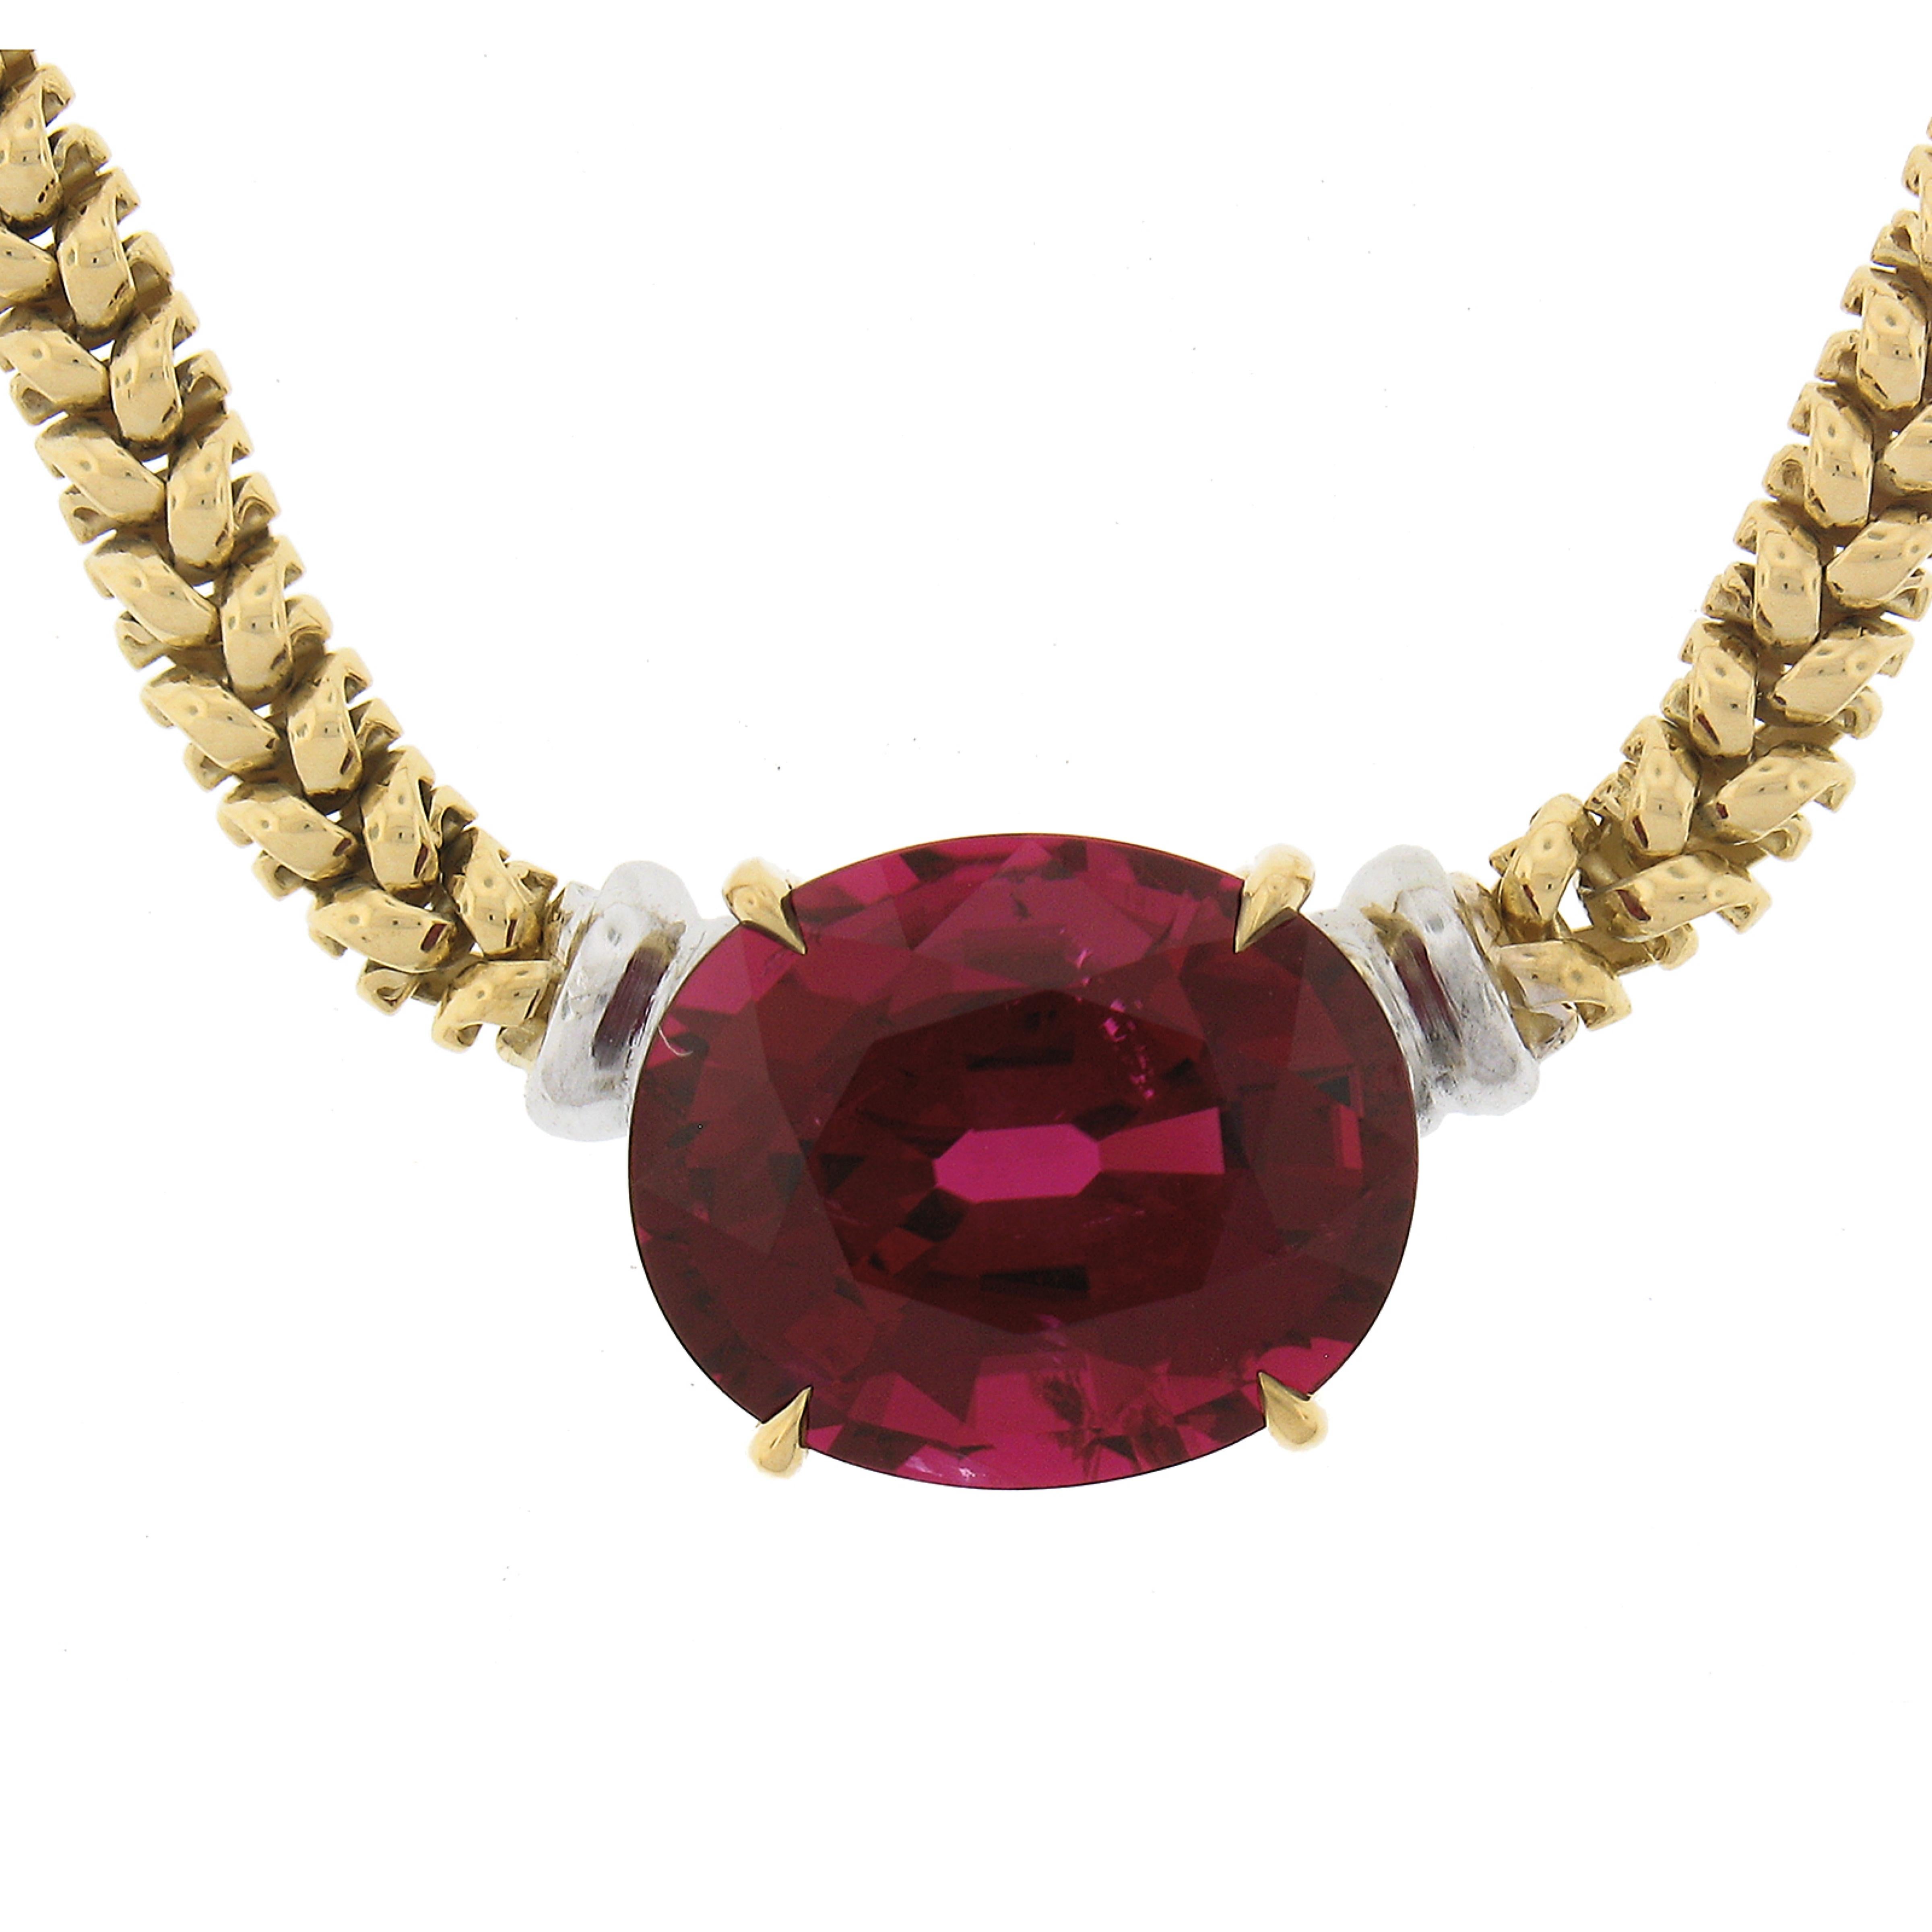 Women's 18k Two Tone Gold 12.82 Carat GIA Large Oval Red Rubellite Tourmaline Necklace For Sale